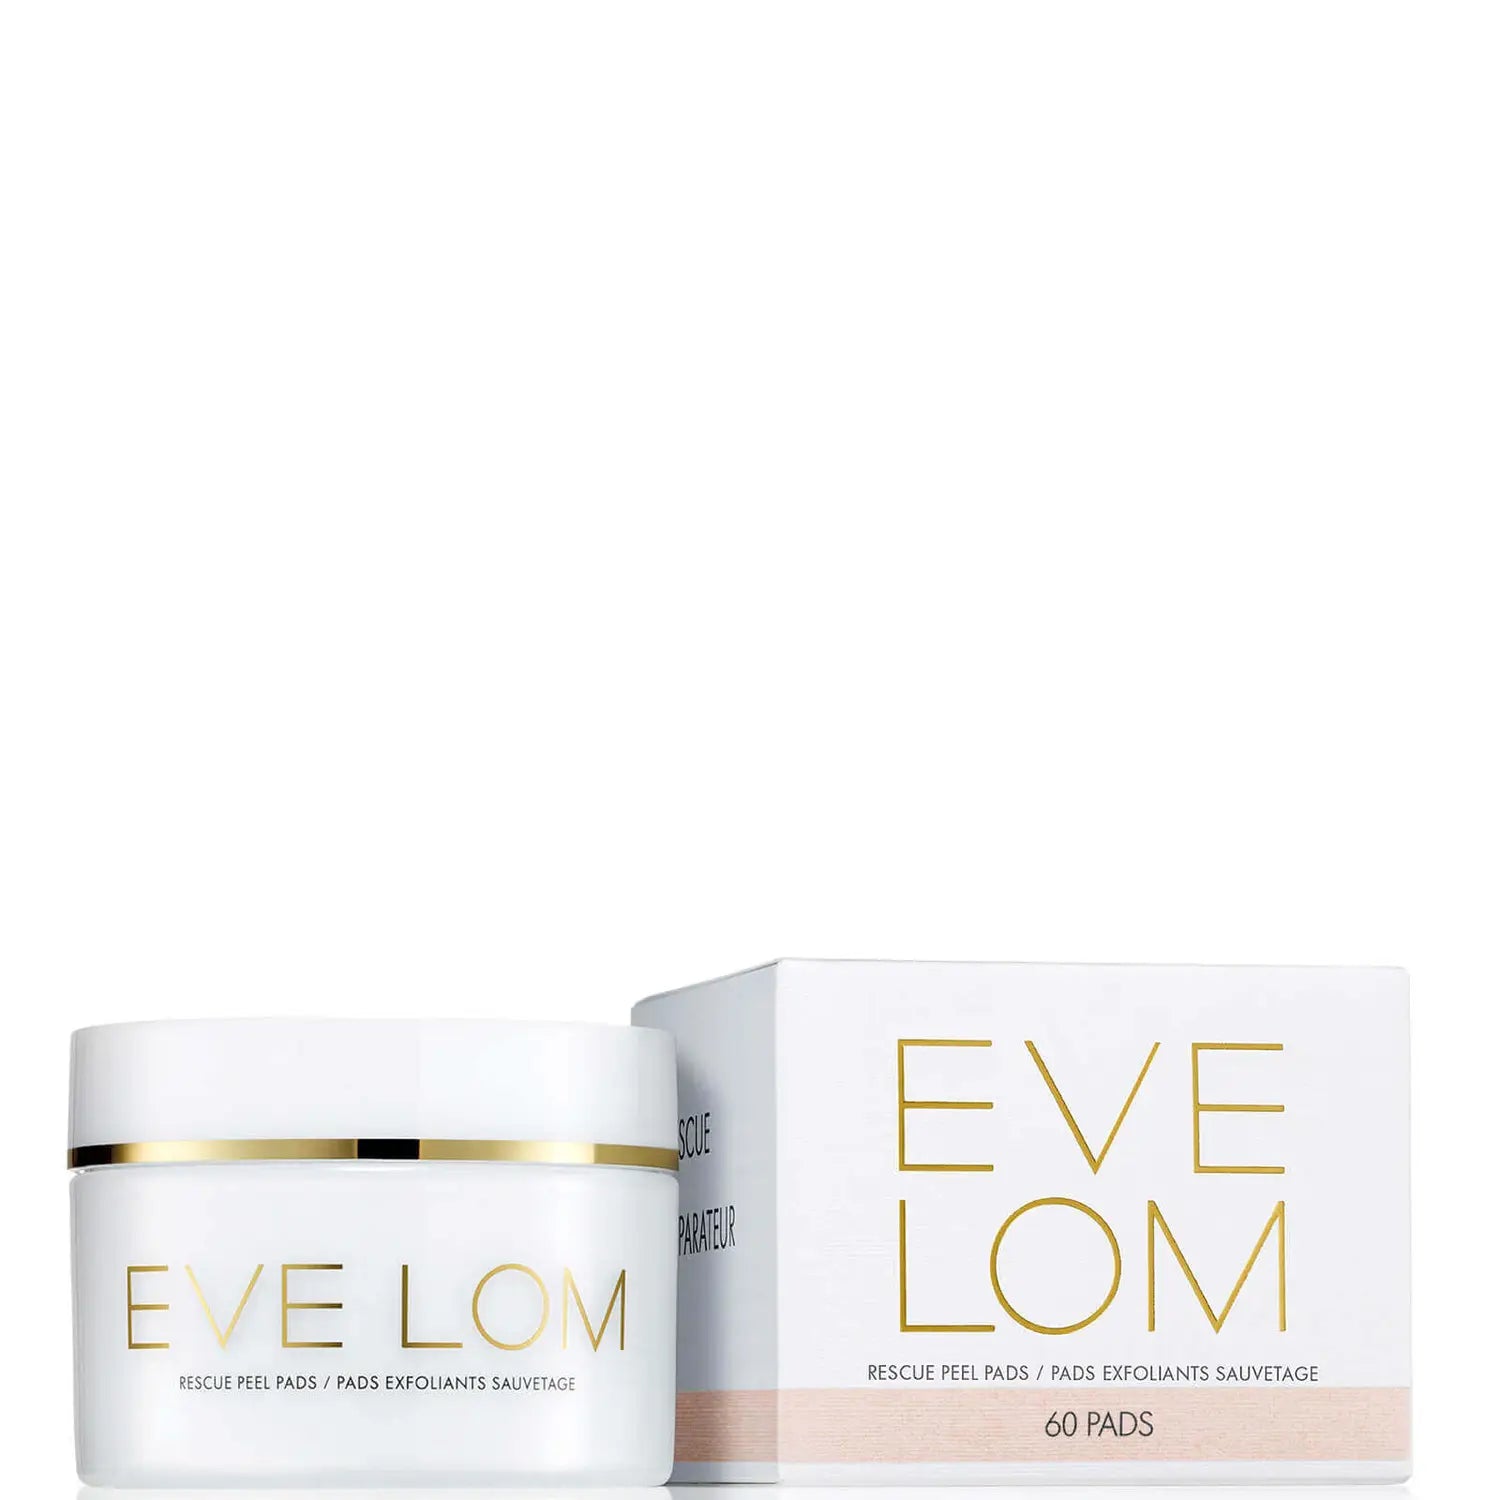 Eve Lom Rescue Peel Pads (60 Pads) - Exfoliating and Resurfacing Treatment with BHA, PHA, and AHA Acids. Reveals smoother, brighter, and revitalized complexion. Contains Glycolic Acid, Multi-Fruit Acid Complex, Lactic Acid, Salicylic Acid, Marshmallow, and Vitamin B3. 100% Biodegradable materials for a thorough cleanse. Paraben, Phthalate, Sulphate, and Cruelty-free. Key benefits include decongesting pores, gentle exfoliation, preserving skin moisture, soothing and calming effect, and increased hydration le